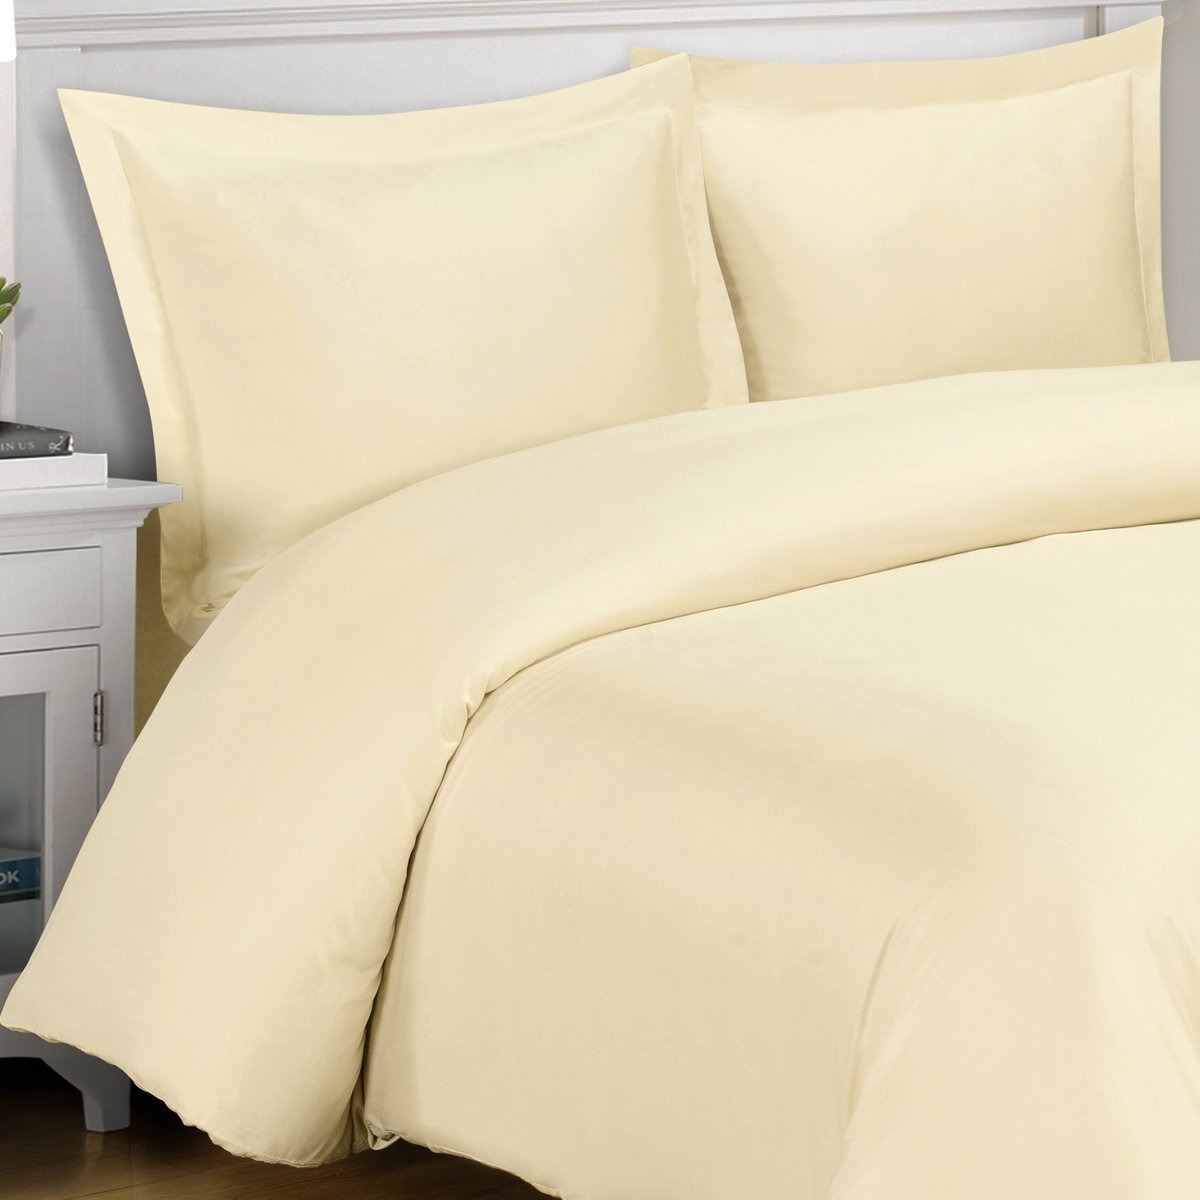 Bamboo Duvet Covers Reviews, A Guide to the Best Six of 2020!